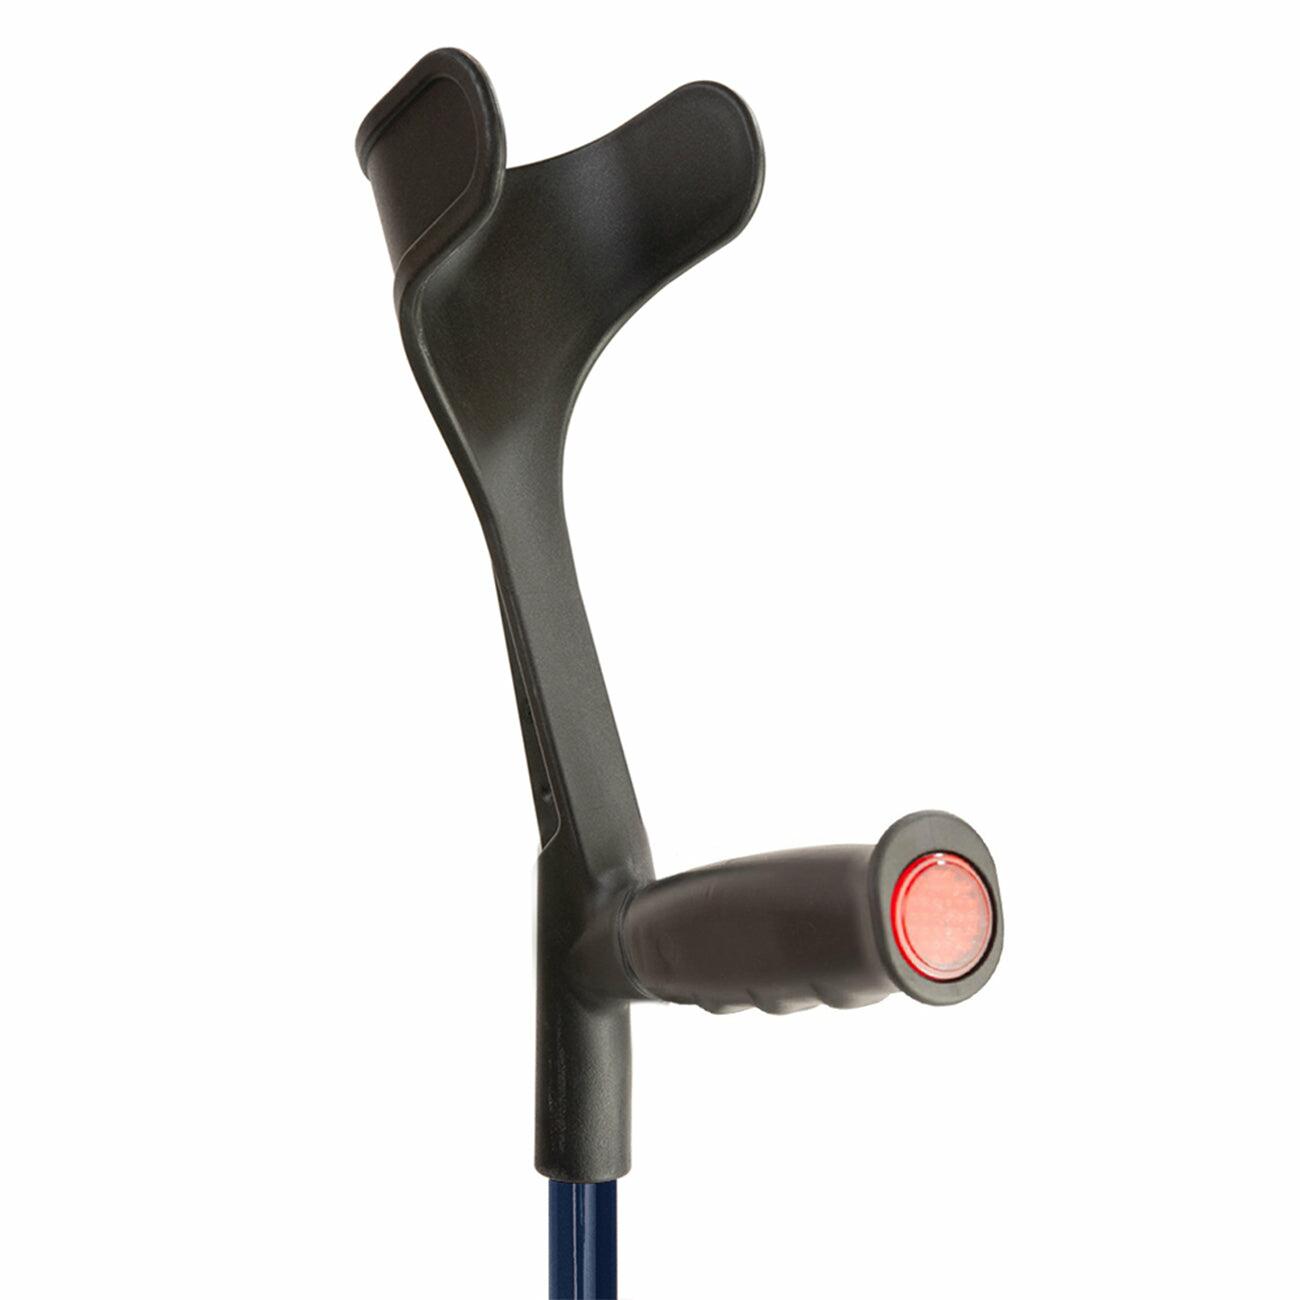 Soft grip handle and open cuff of the Flexyfoot Soft Grip Open Cuff Crutch